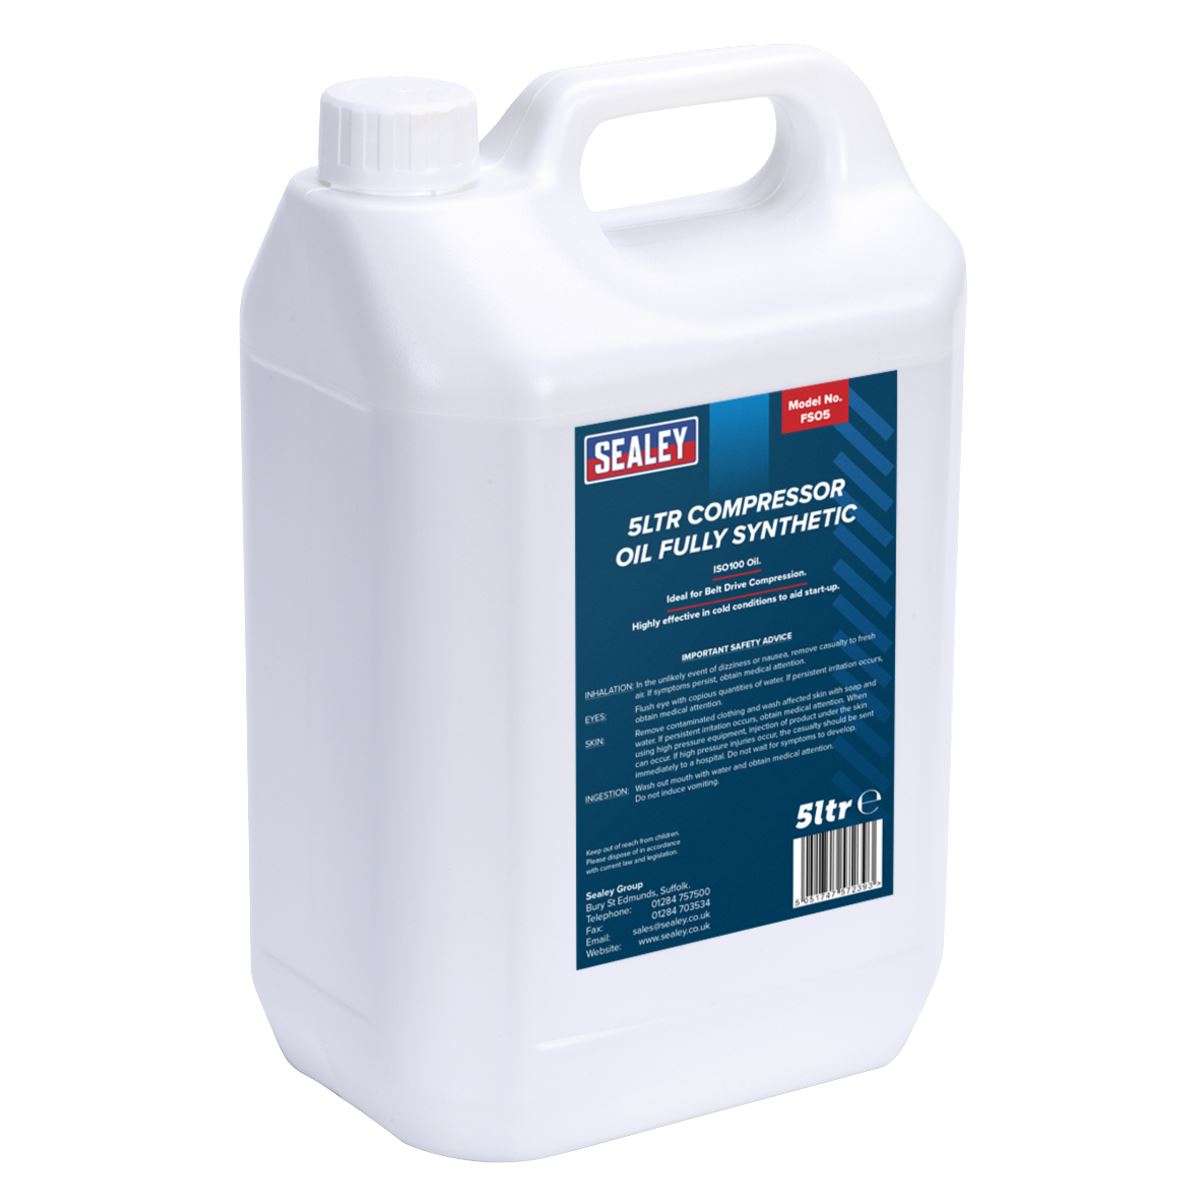 Sealey Compressor Oil Fully Synthetic 5L